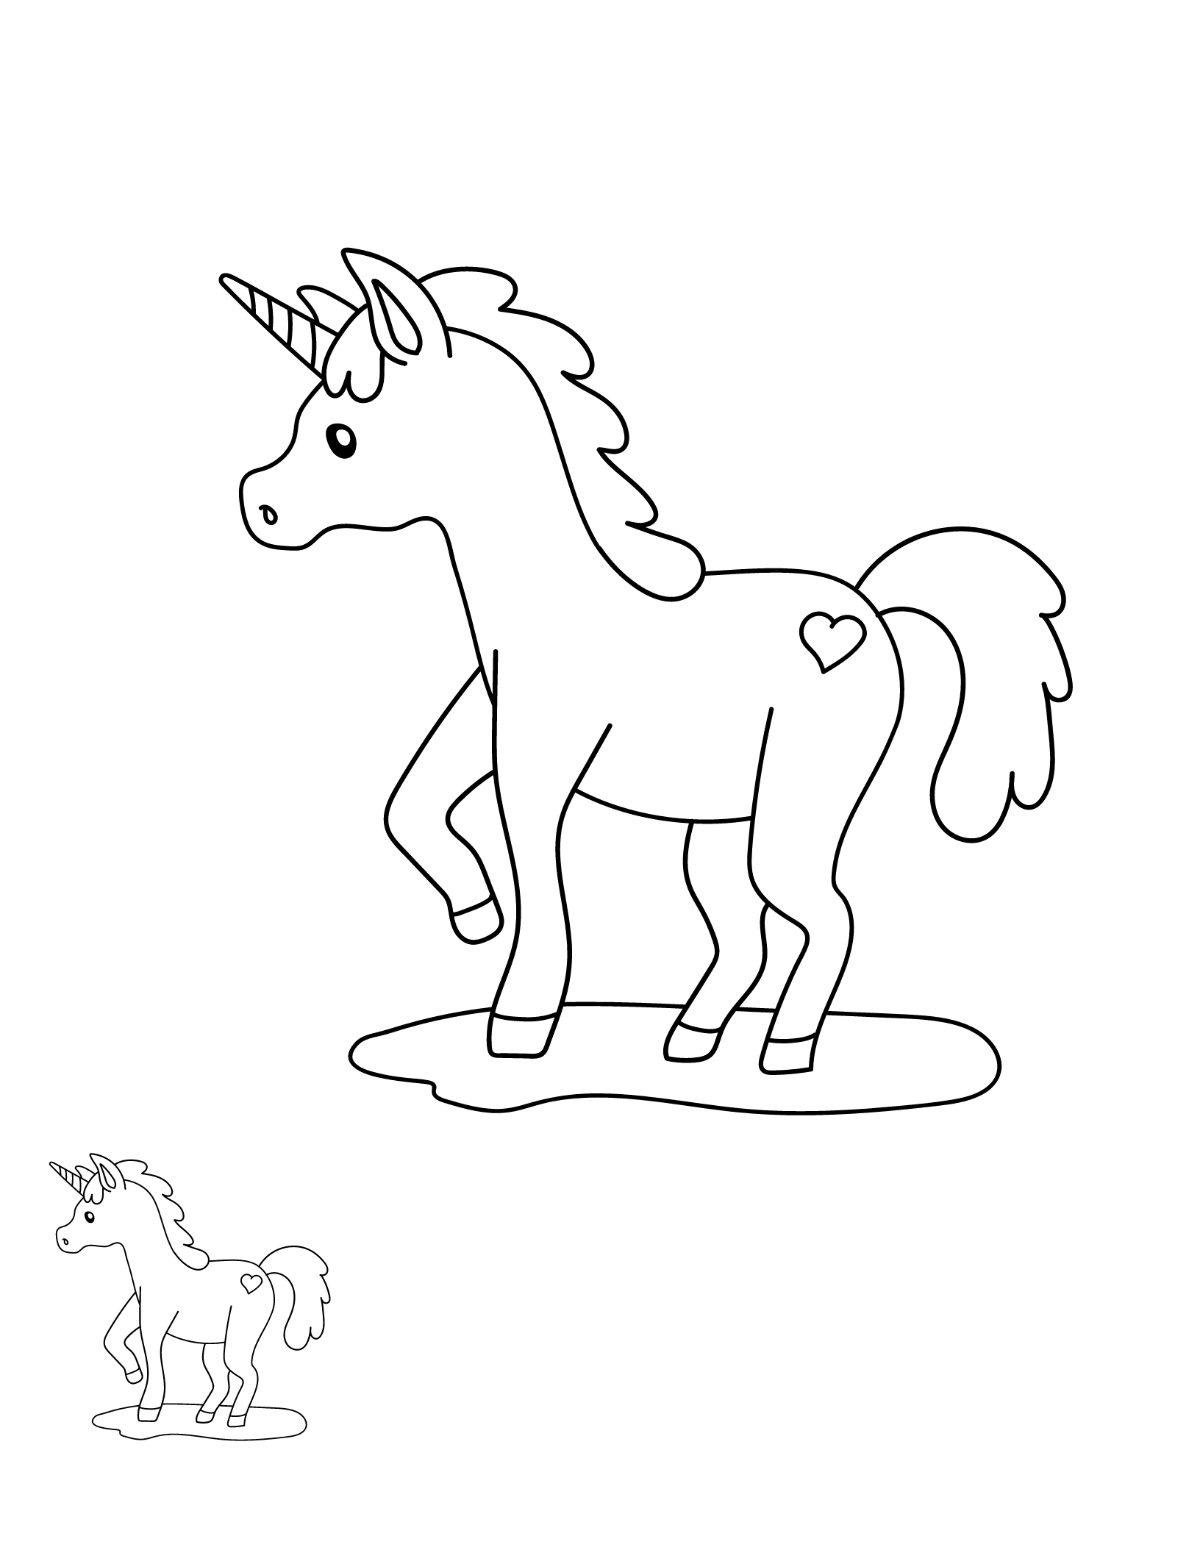 Easy Unicorn Coloring Page Template